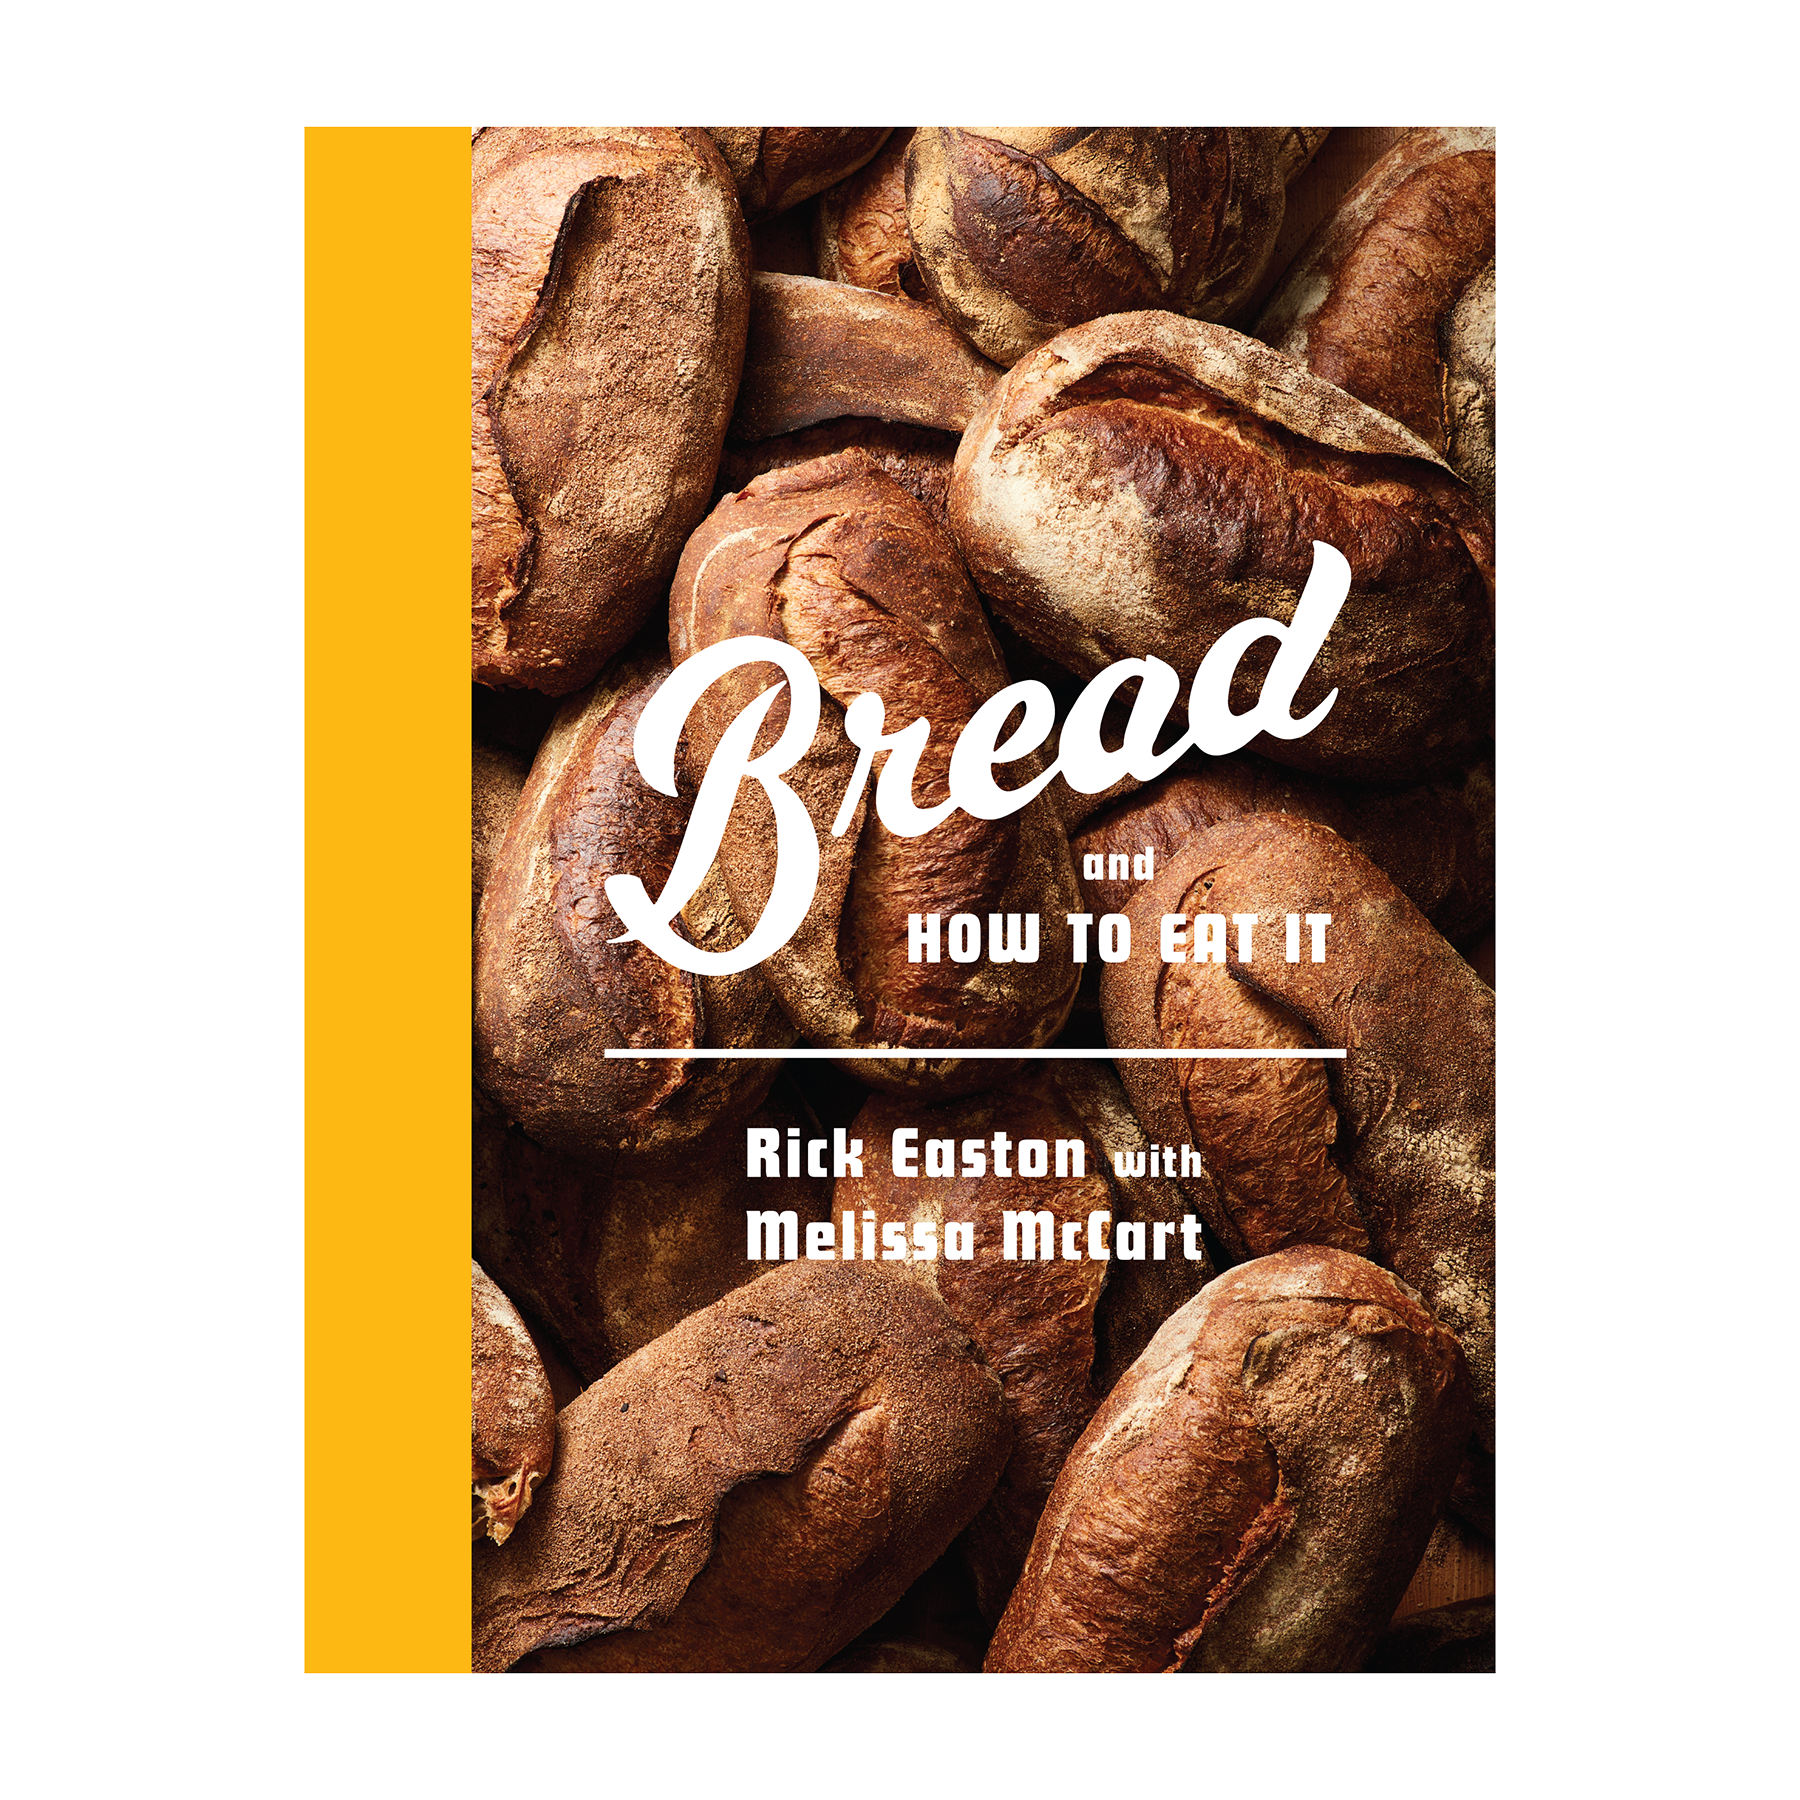 Bread and How To Eat It